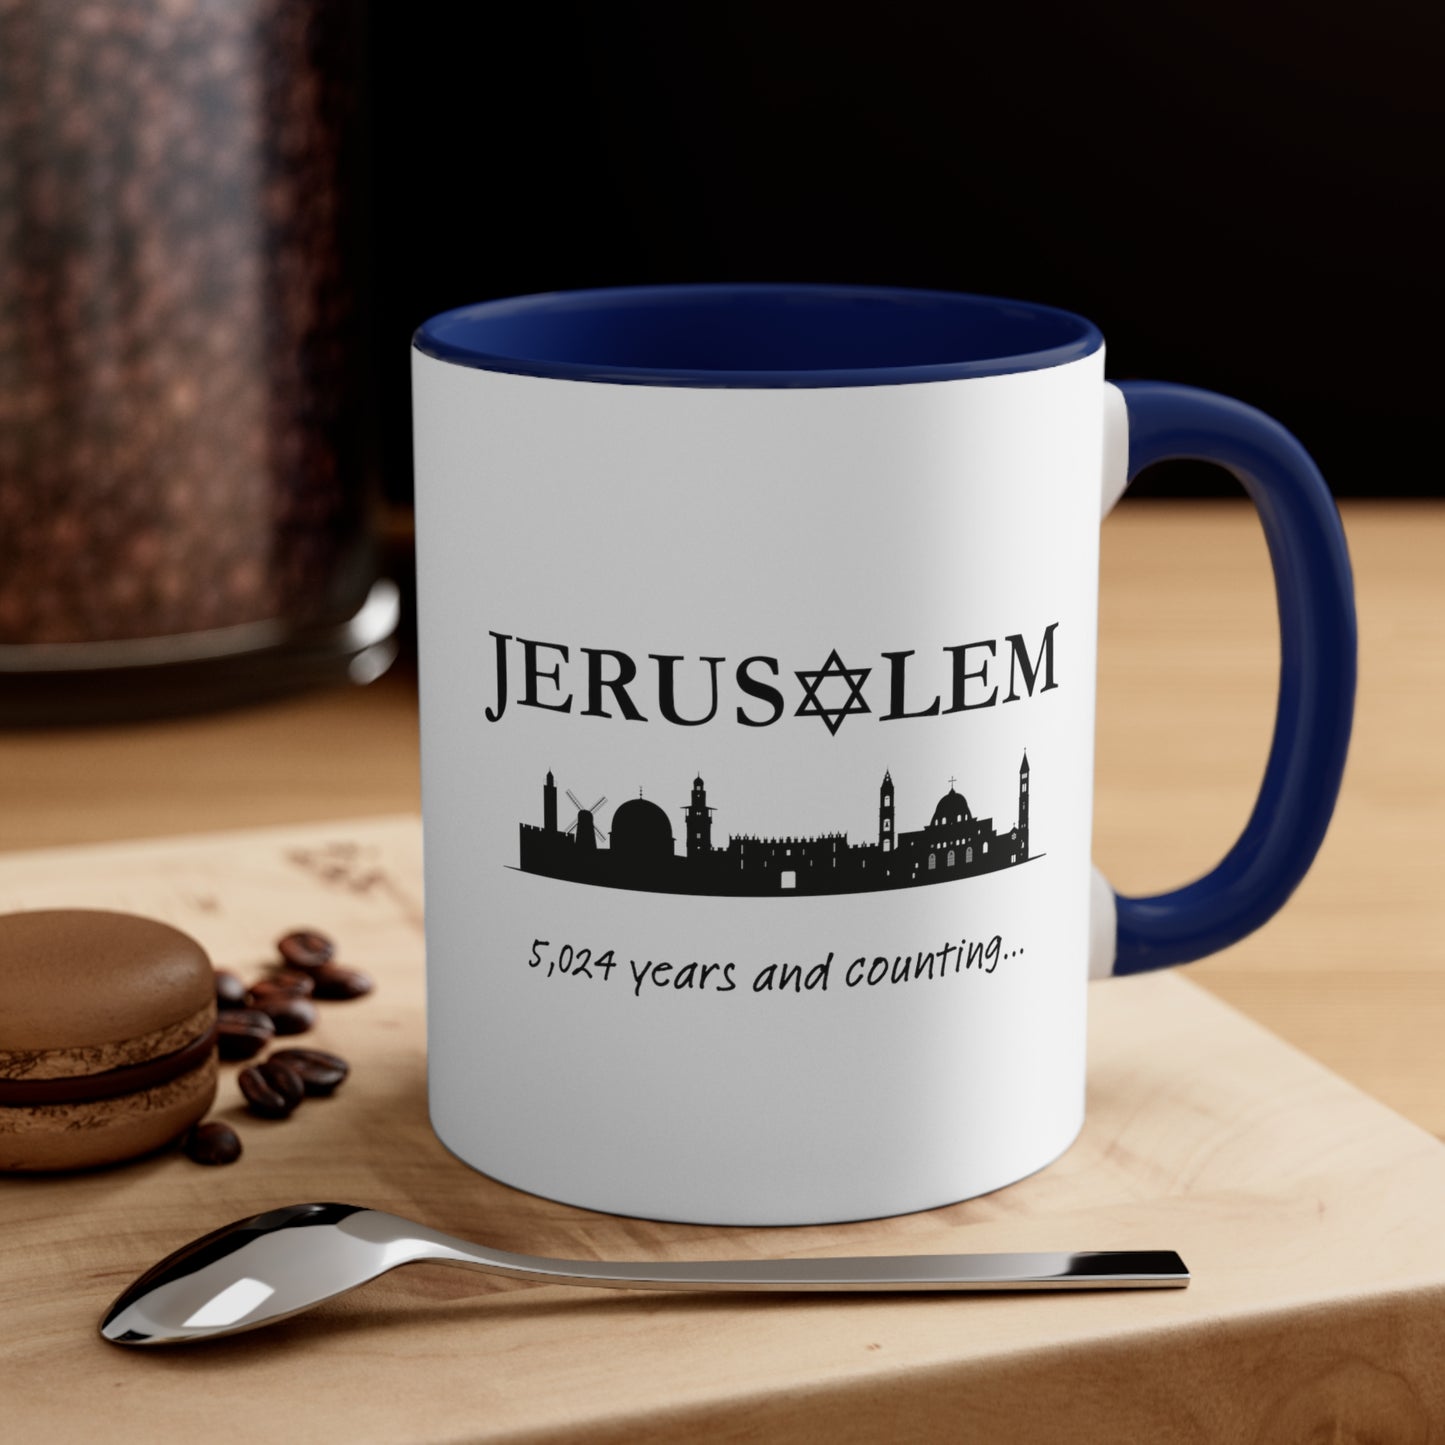 Jerusalem - 5,024 Years and Counting... Accent Coffee Mug, 11oz